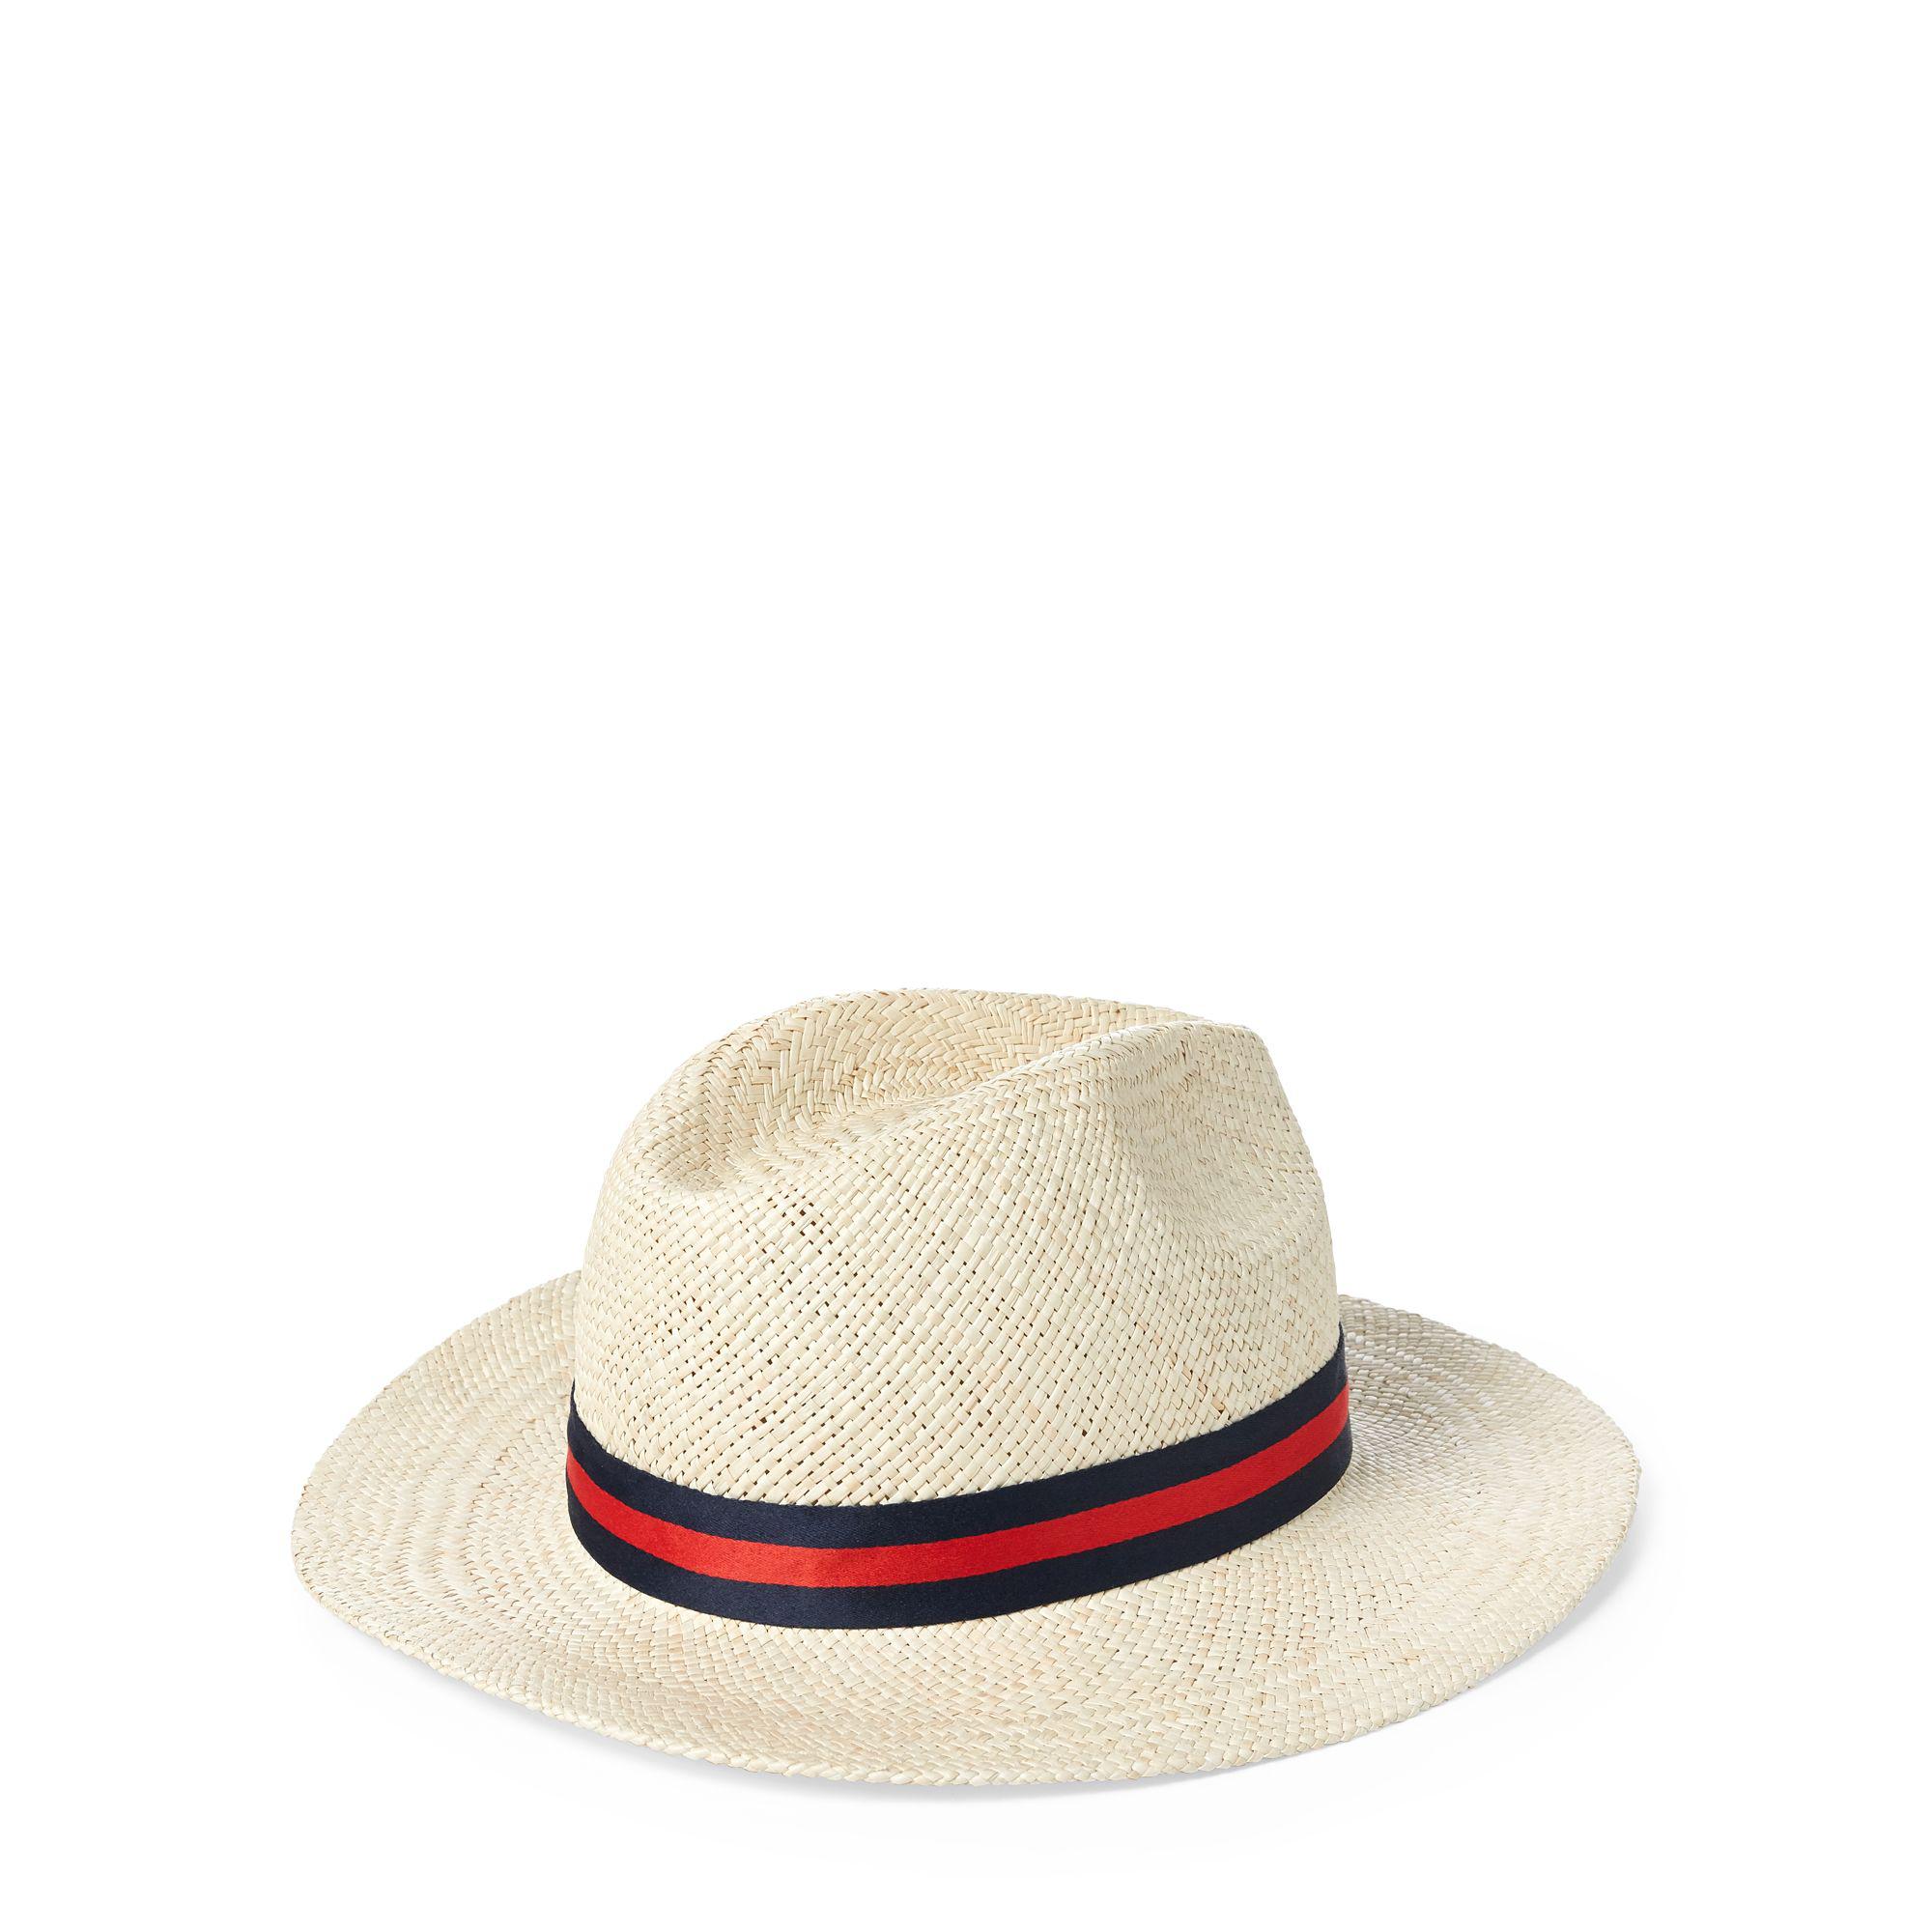 Polo Ralph Lauren Synthetic Polo Panama Hat in Natural for Men - Lyst